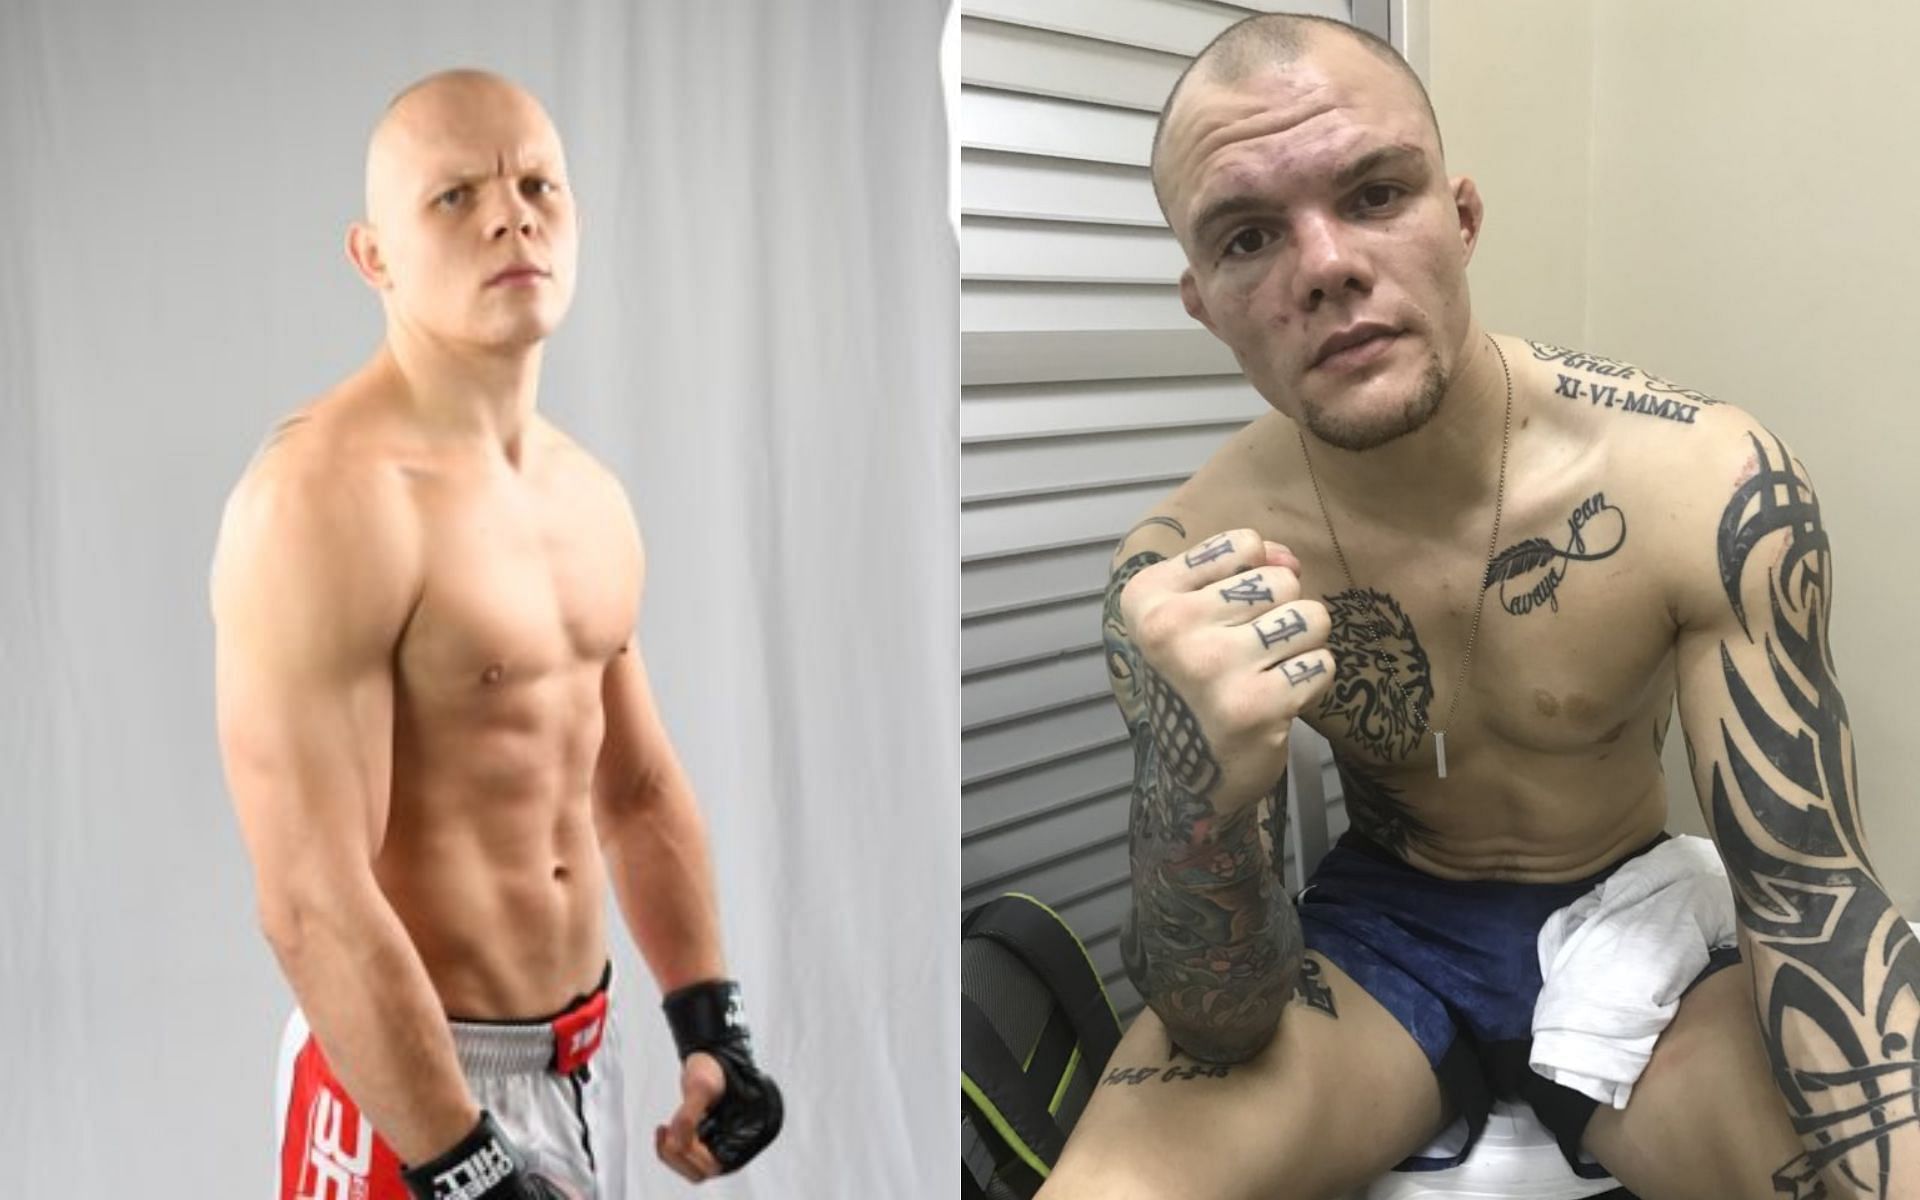 UFC fans have noticed the similarities between newcomer Bogdan Guskov and veteran Anthony Smith [Image Credit: @BogdanCarevich and @lionheartasmith on Twitter]